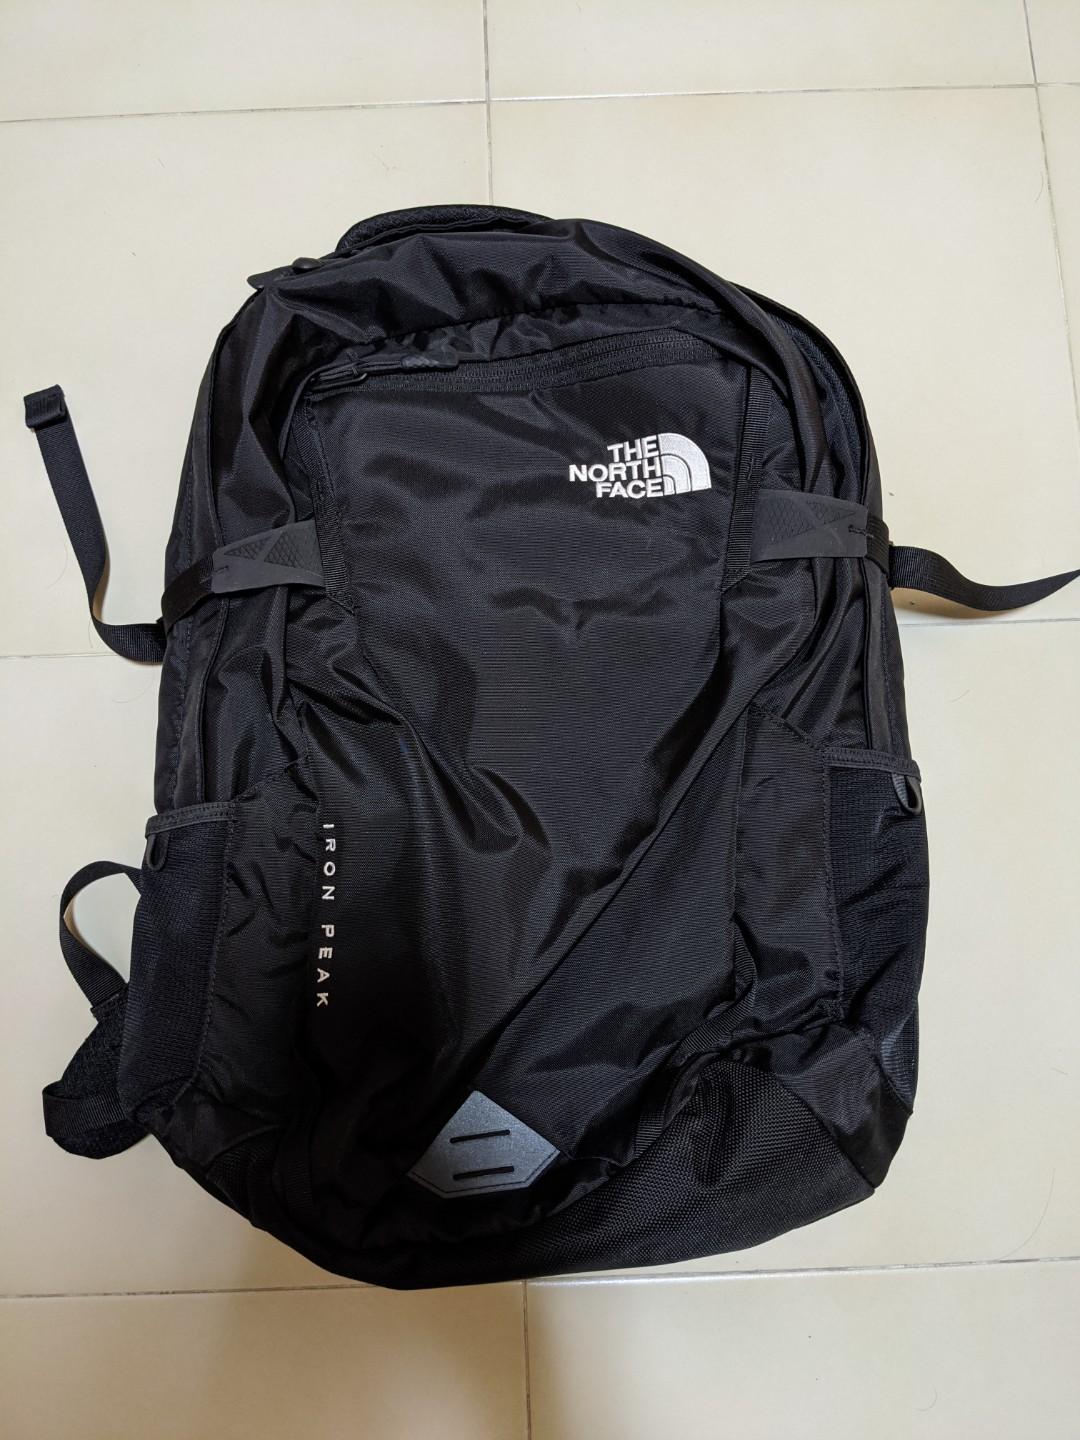 The North Face Iron Peak Backpack *USED ONCE ONLY*